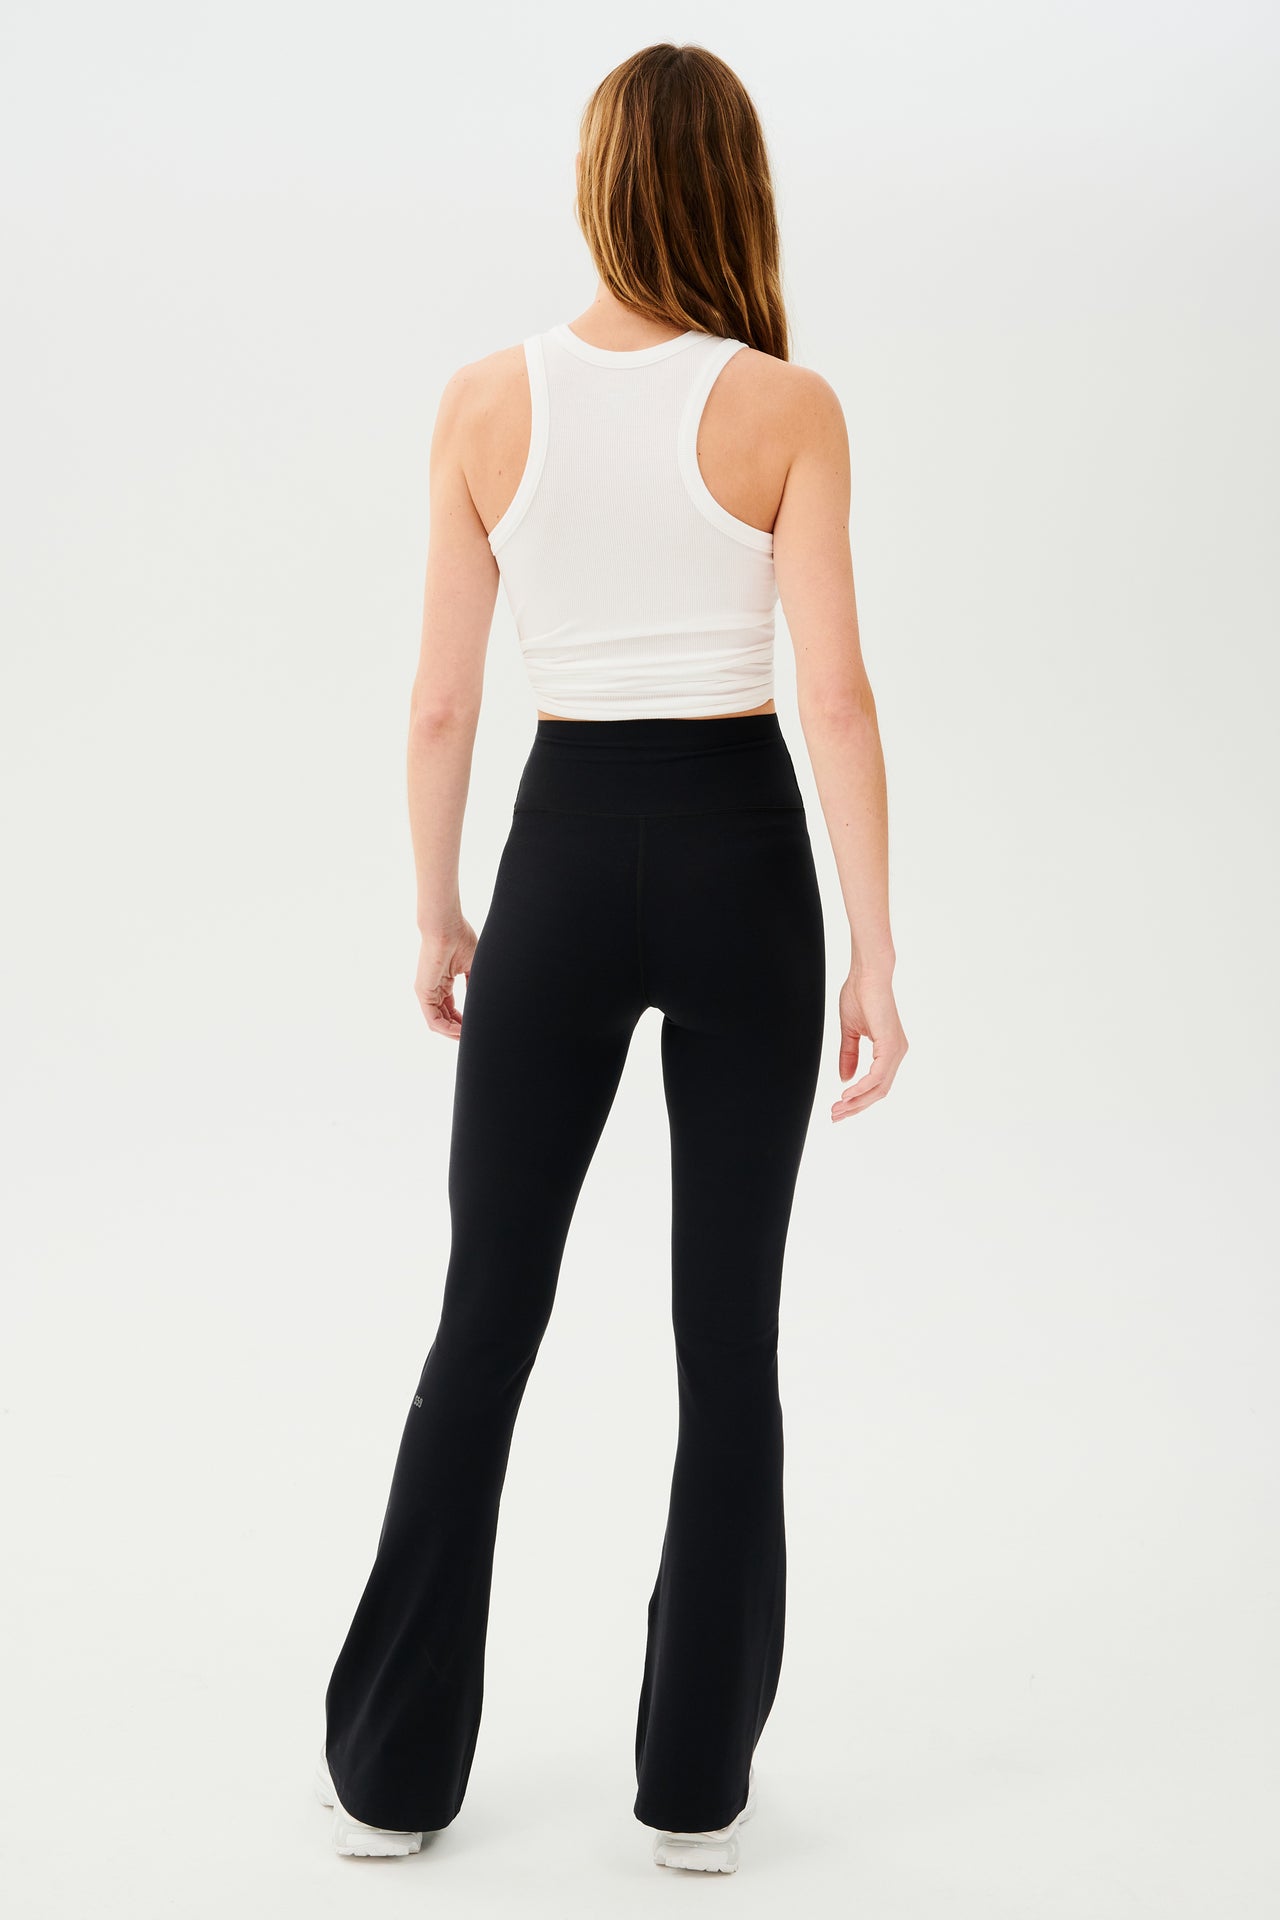 The back view of a woman wearing Raquel High Waist Airweight Flare - Black leggings made of SPLITS59 fabric.